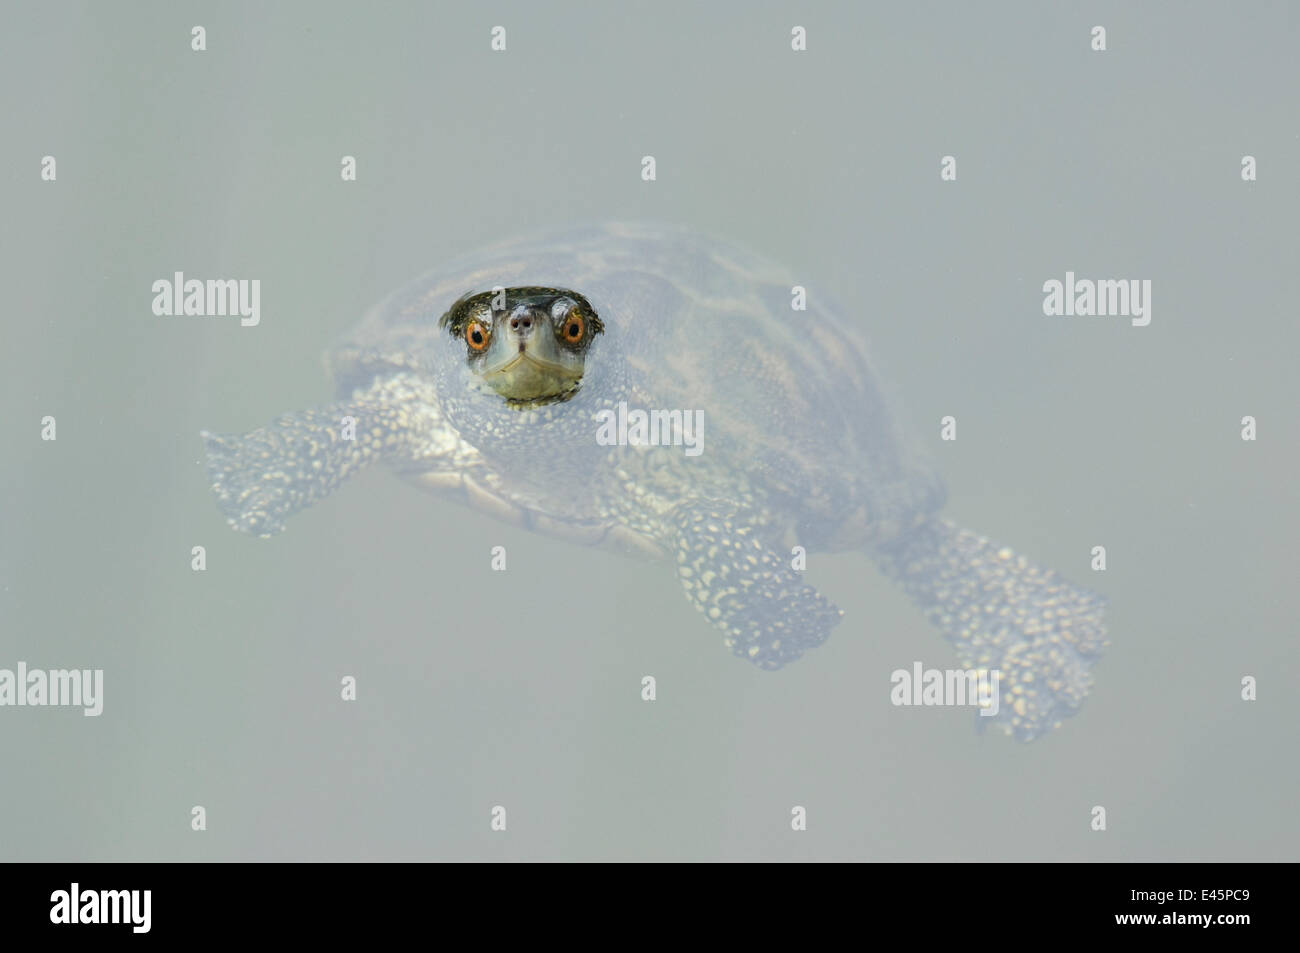 Portrait of Caspian / Stripe necked terrapin (Mauremys caspica) swimming with head above water, Lesbos, Greece Stock Photo